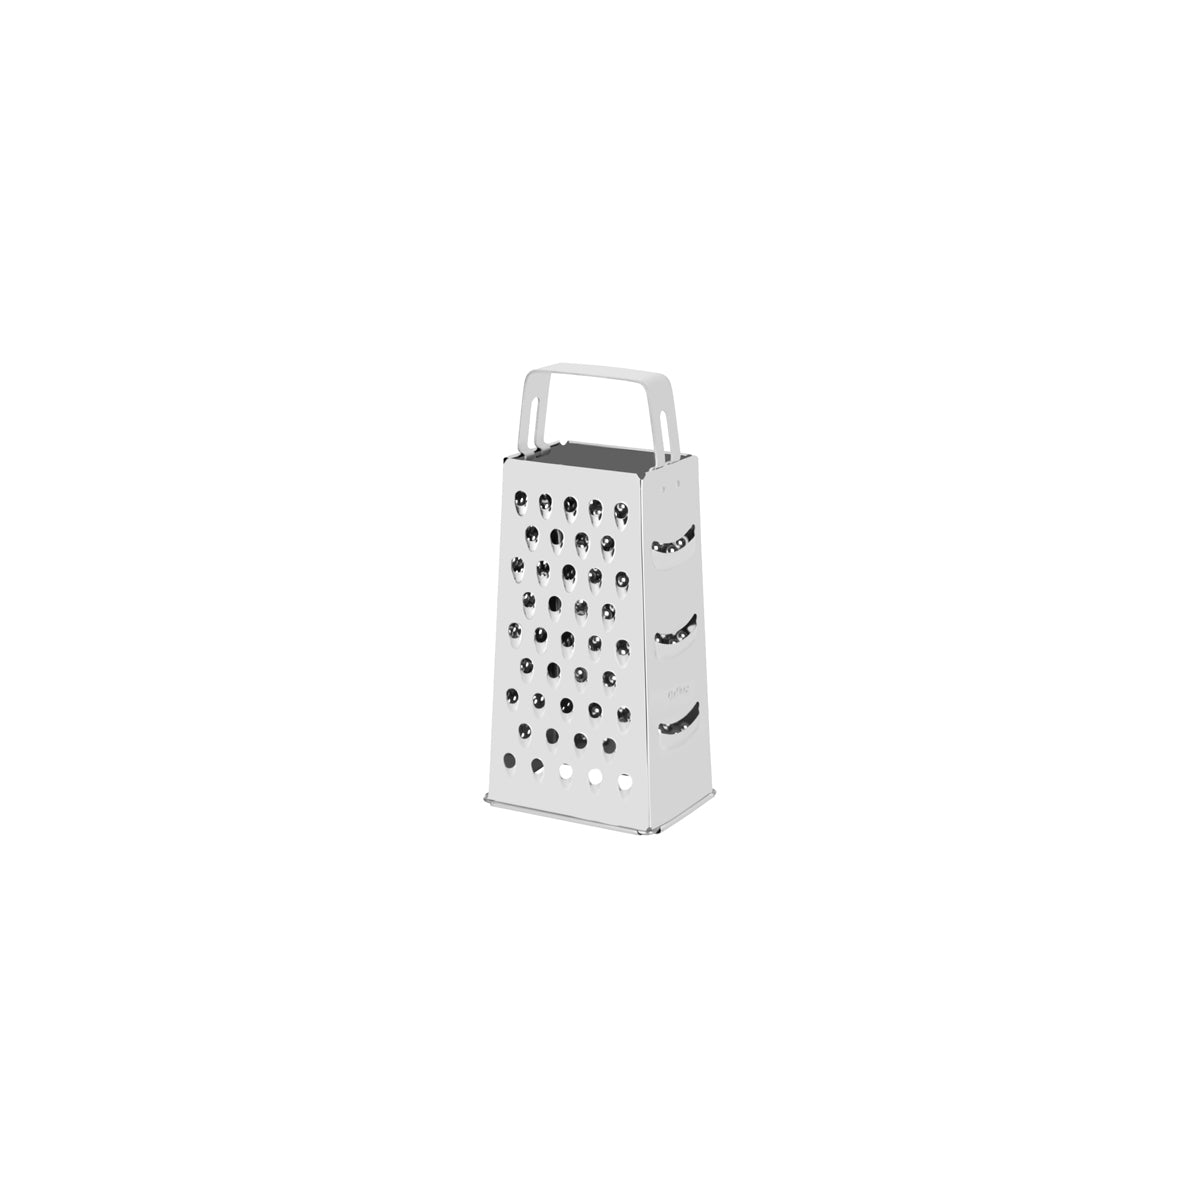 07344 Chef Inox Grater 4 Sided Stainless Steel Handle 190mm Tomkin Australia Hospitality Supplies